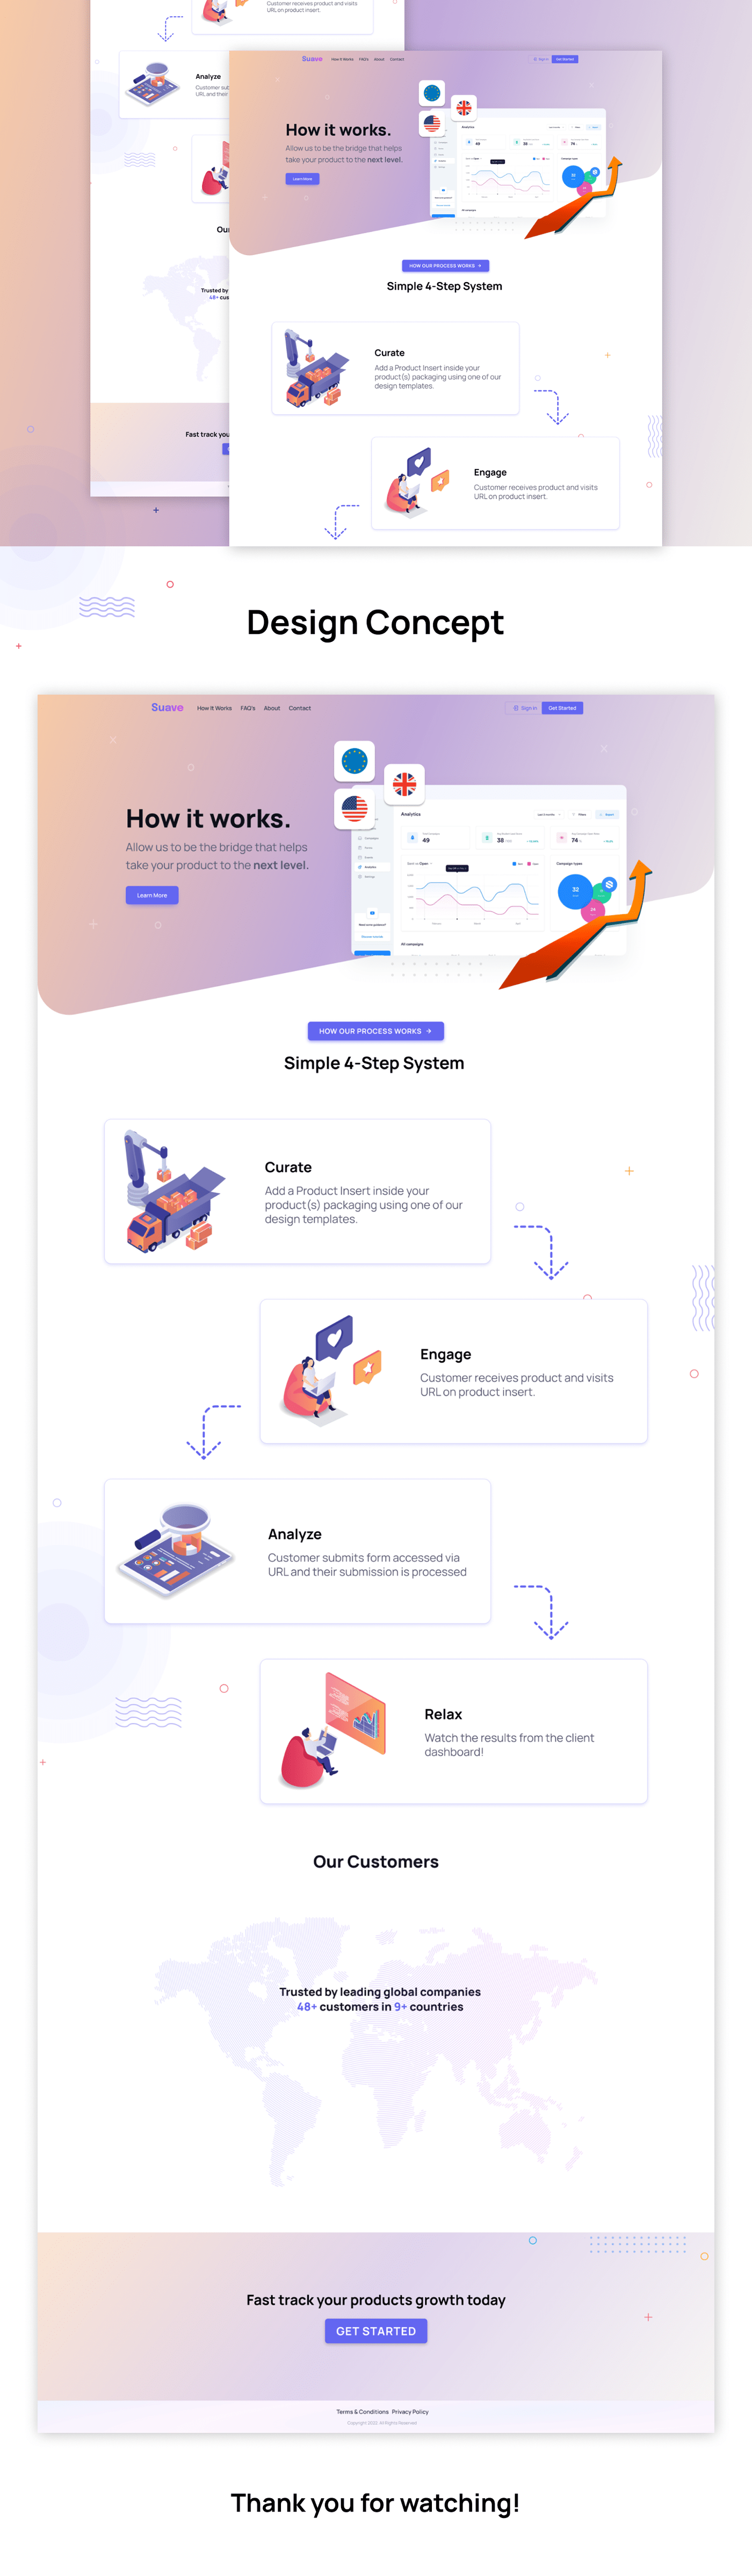 Suave Website - How it works page layout design